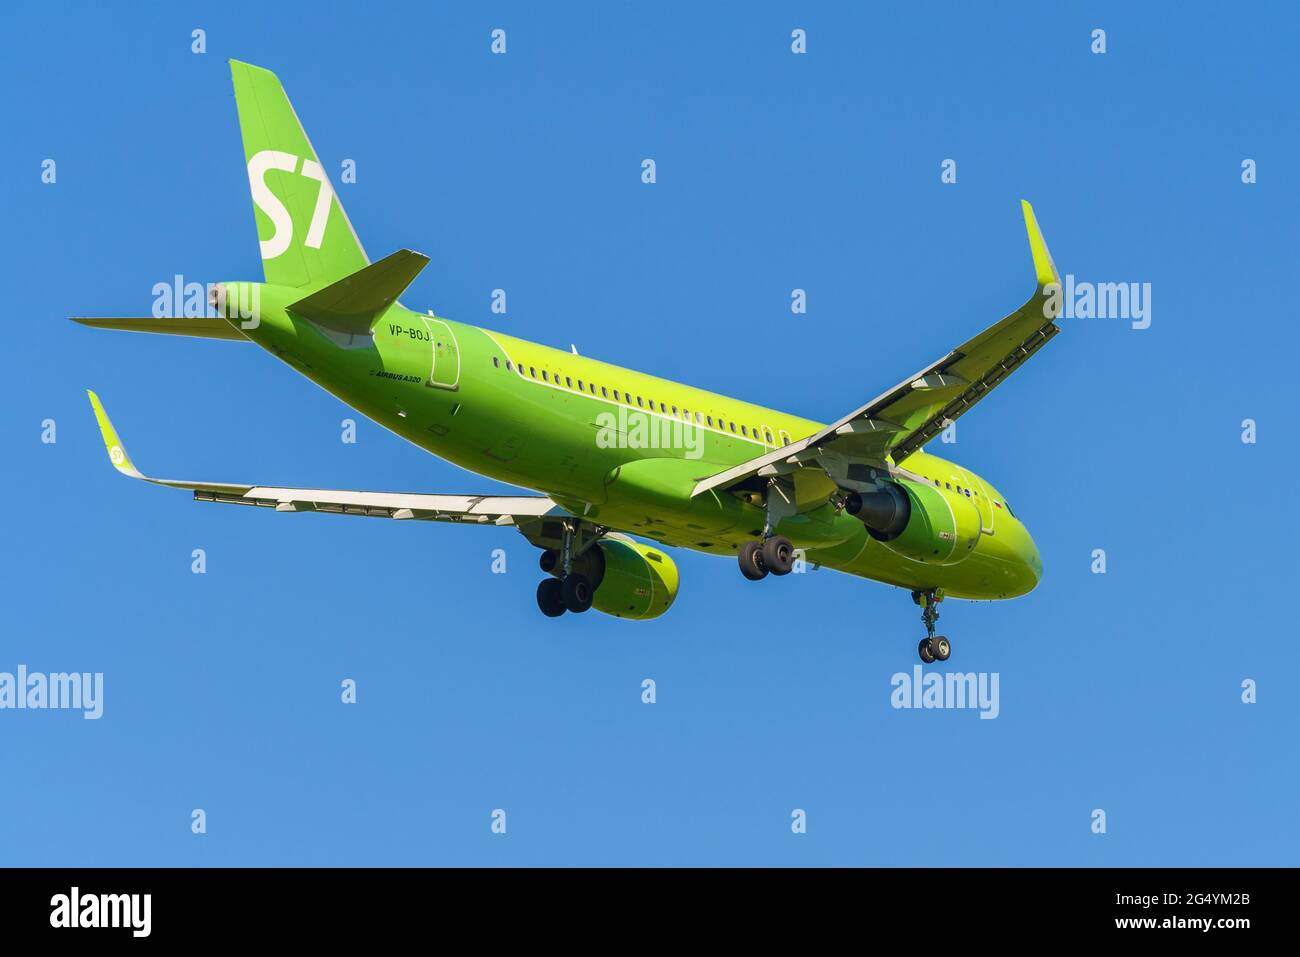 SAINT PETERSBURG, RUSSIA - MAY, 2021: Airbus A320-214 (VP-BOJ) of S7 Airlines on the glide path in the blue cloudless sky Stock Photo